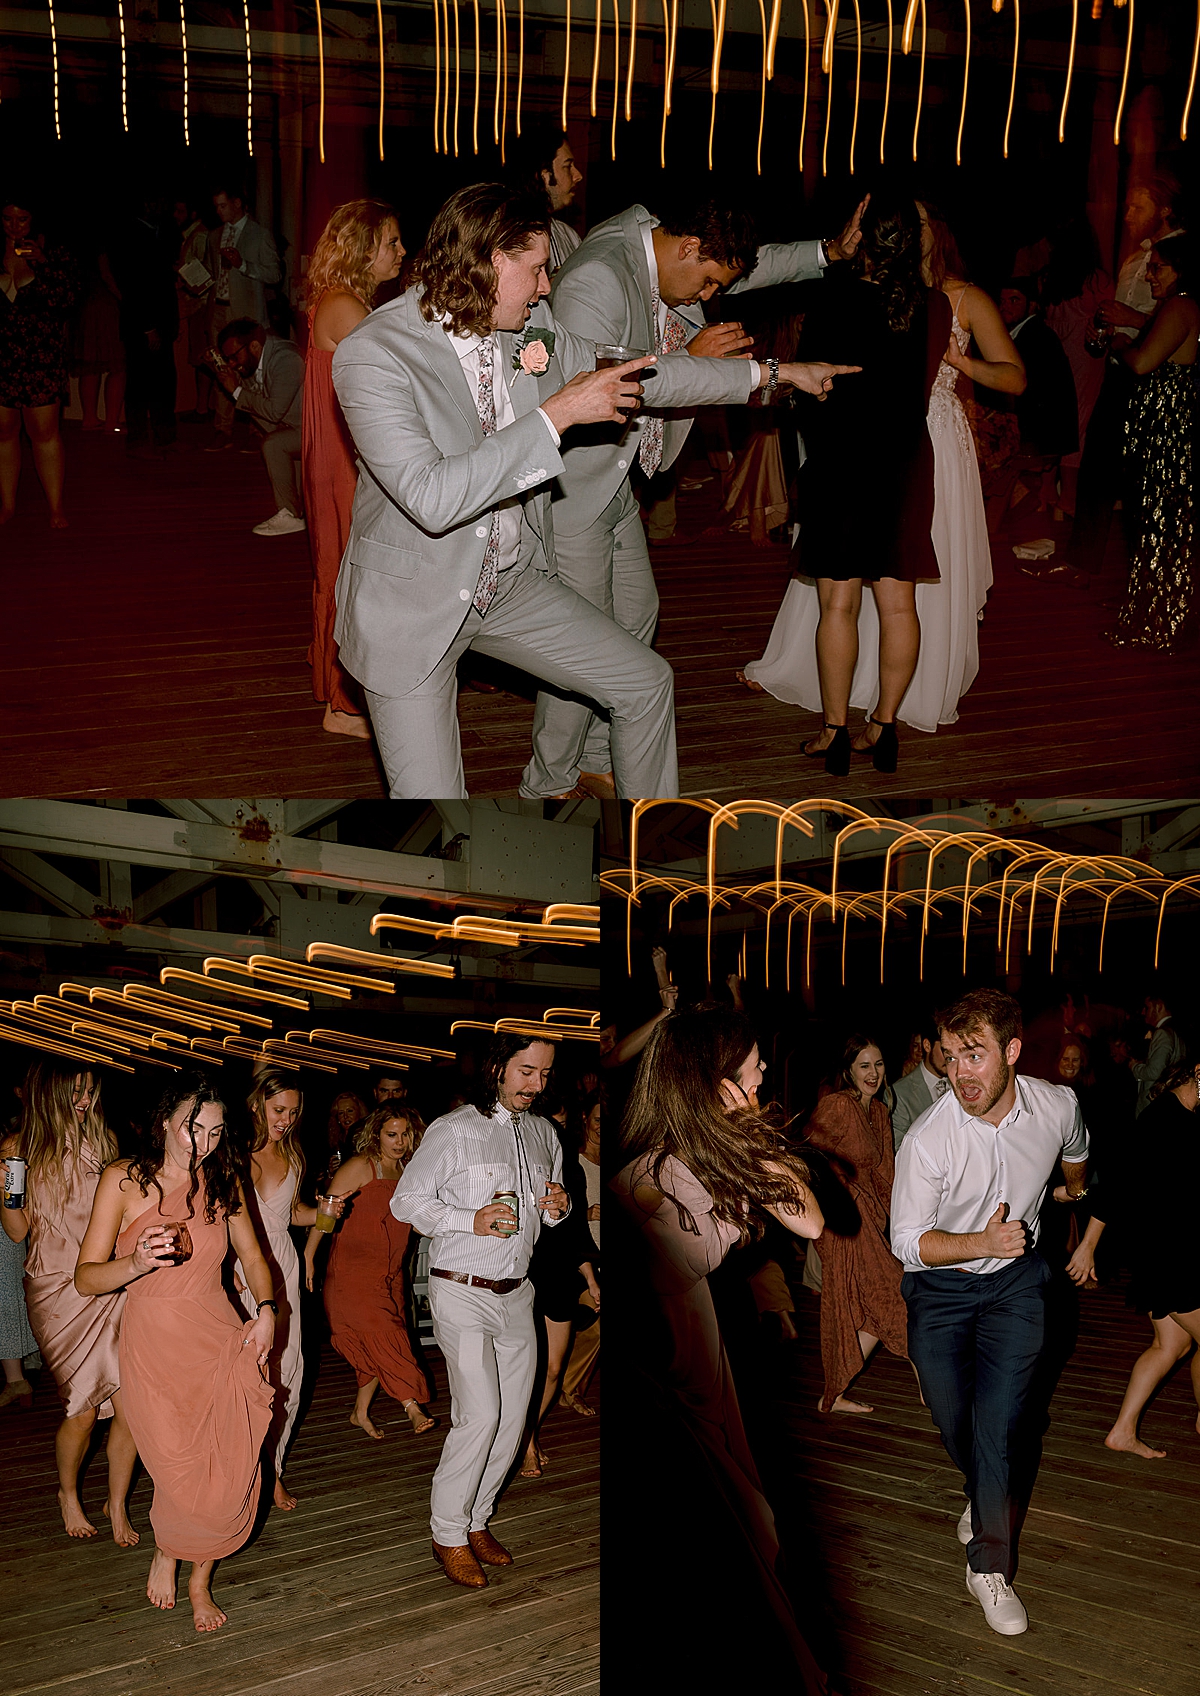 guests dancing at reception by Emily burns photo 